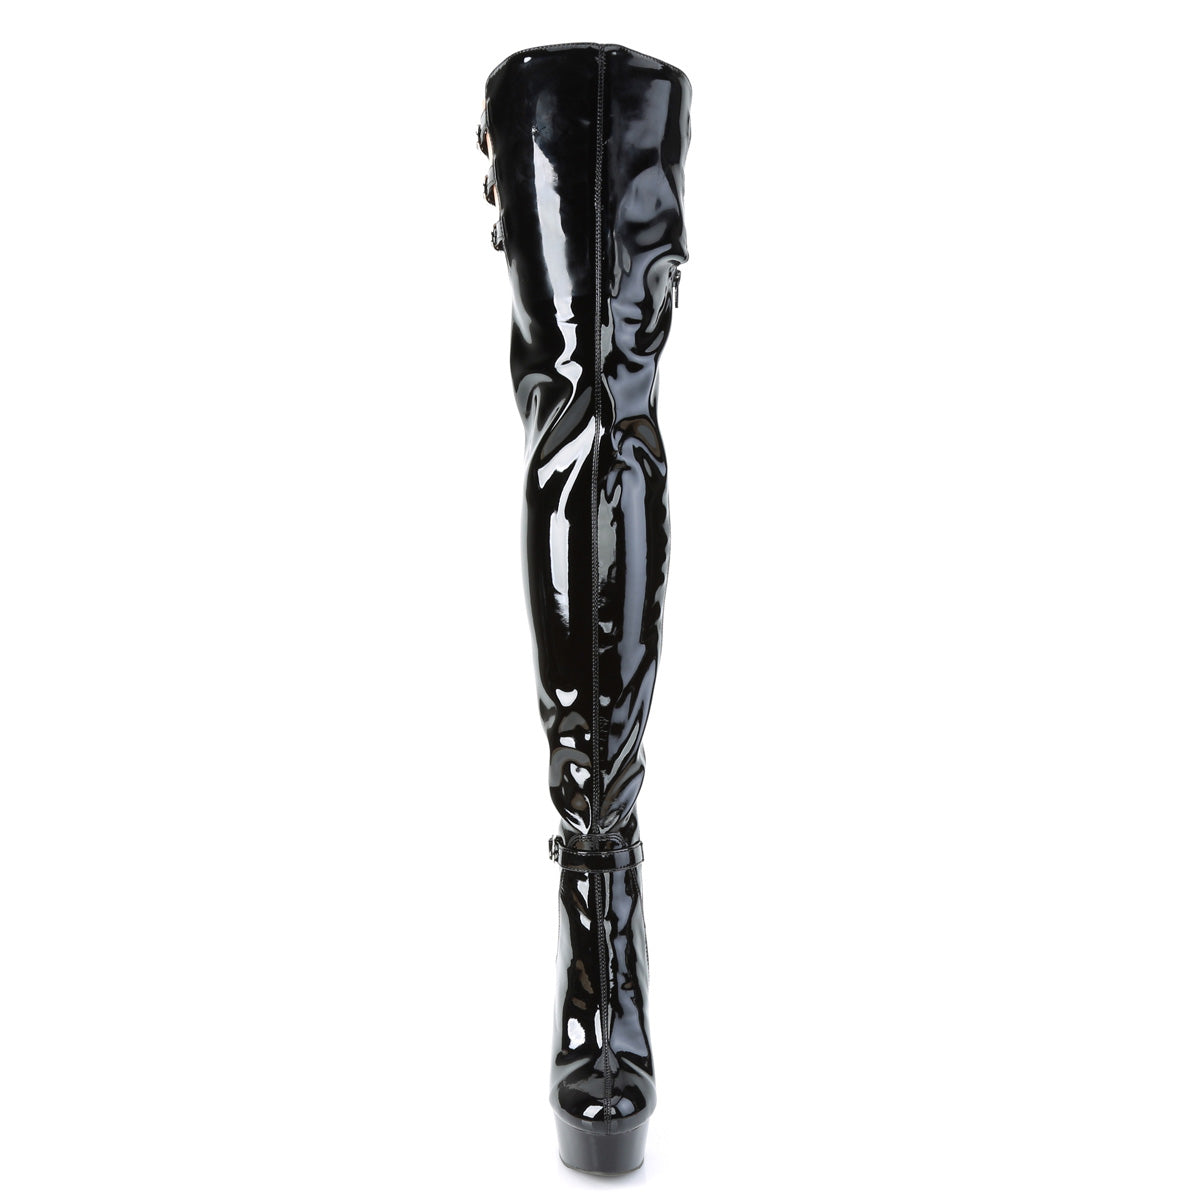 DELIGHT-3055 6" Heel Black Stretch Patent Pole Dancer Boots-Pleaser- Sexy Shoes Alternative Footwear